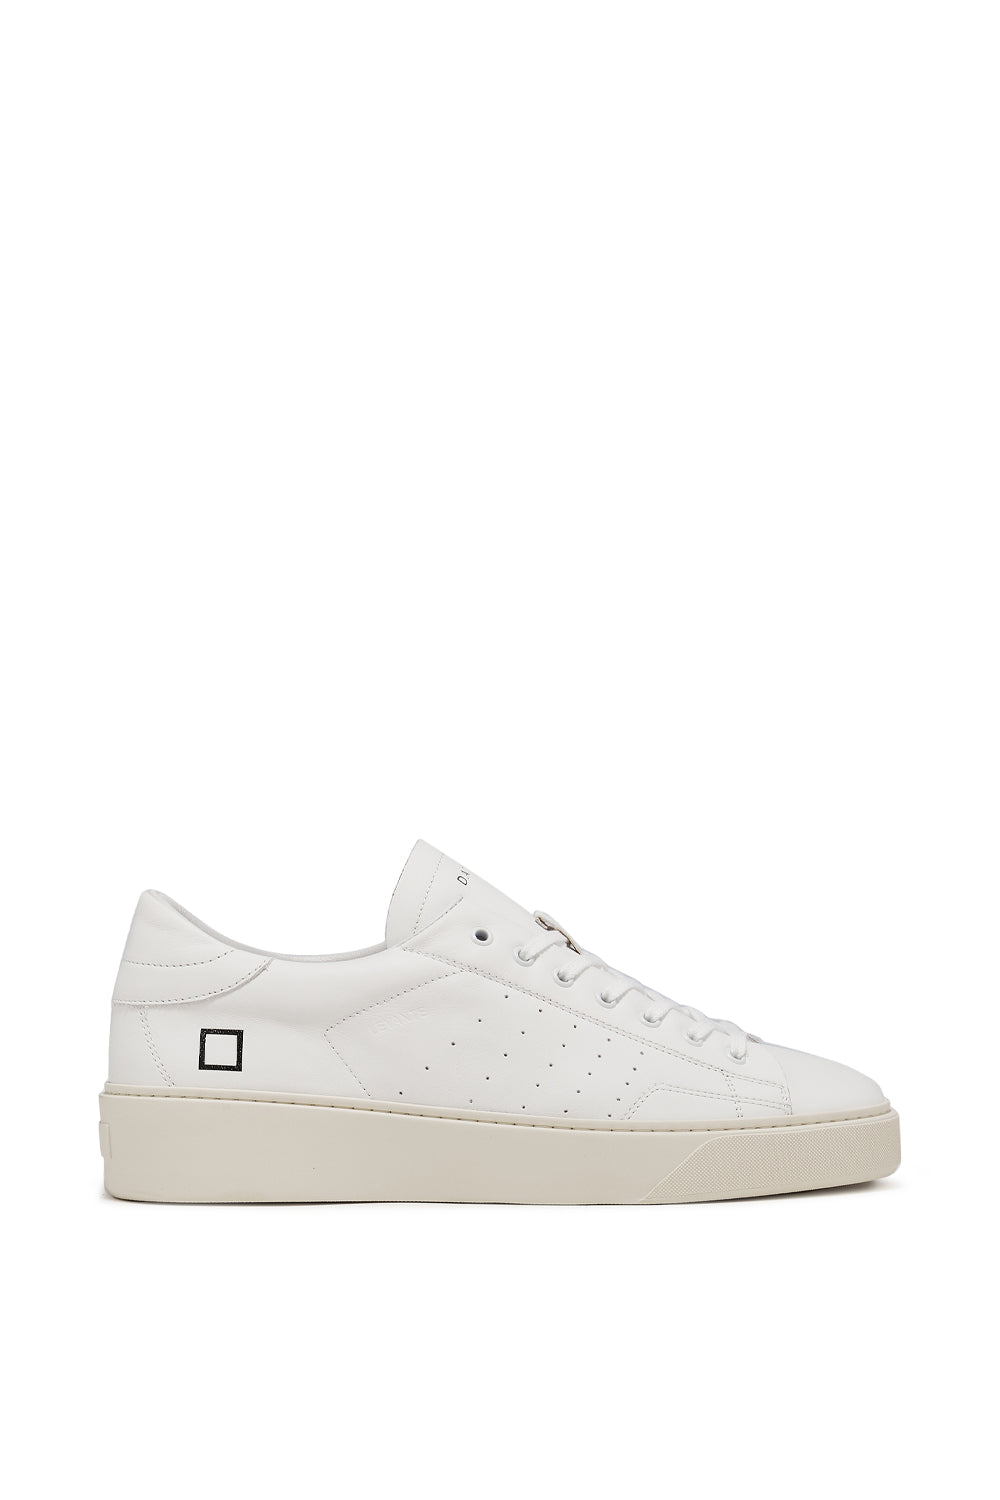 Buy the D.A.T.E. Levante Calf Sneaker in White at Intro. Spend £50 for free UK delivery. Official stockists. We ship worldwide.